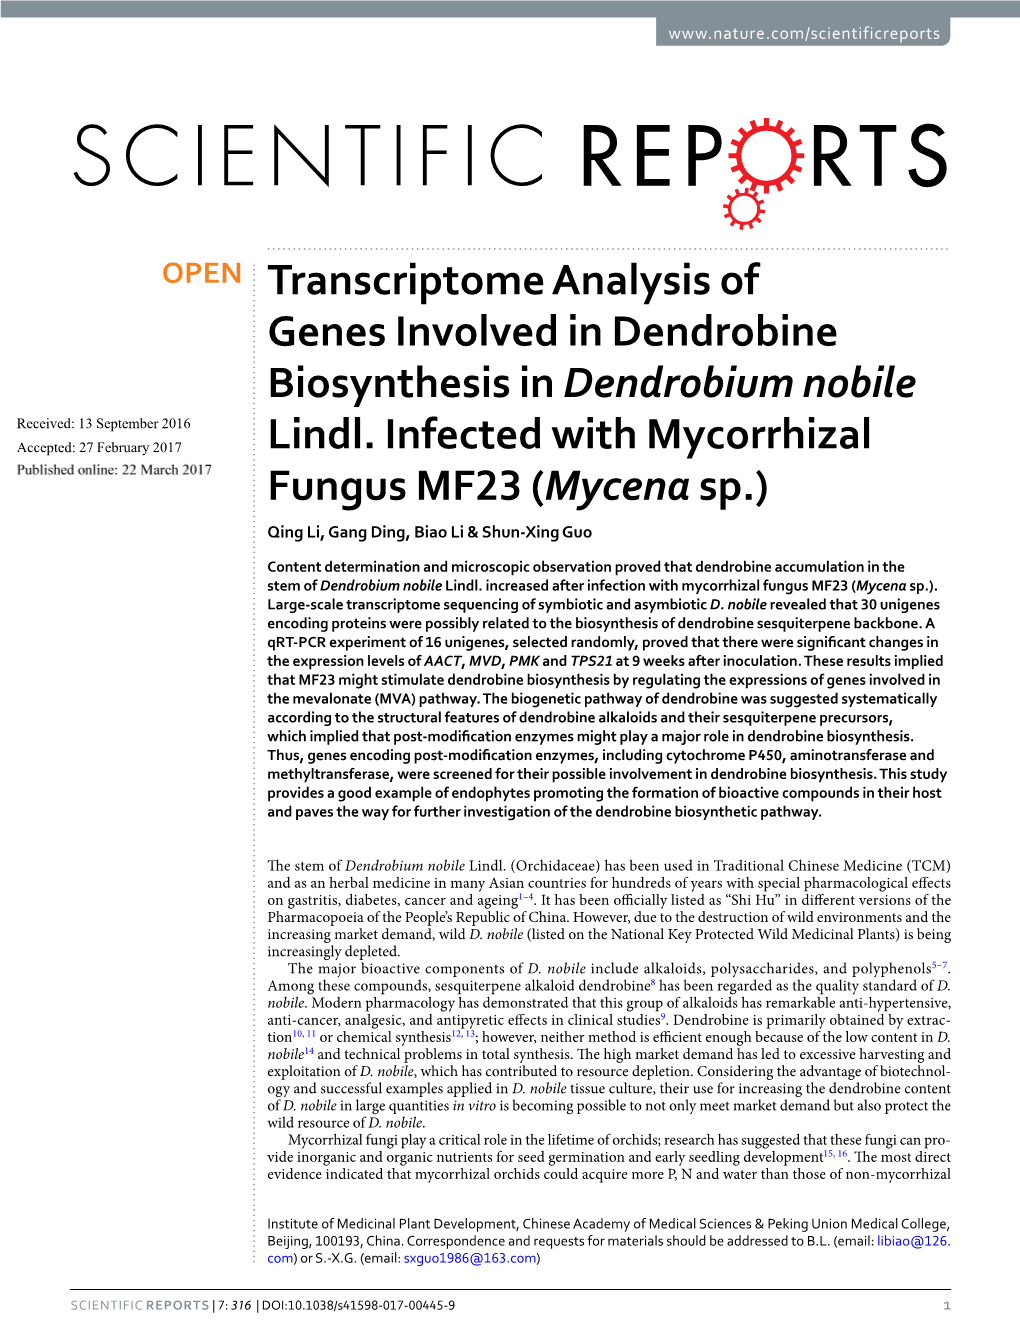 Transcriptome Analysis of Genes Involved in Dendrobine Biosynthesis in Dendrobium Nobile Received: 13 September 2016 Accepted: 27 February 2017 Lindl